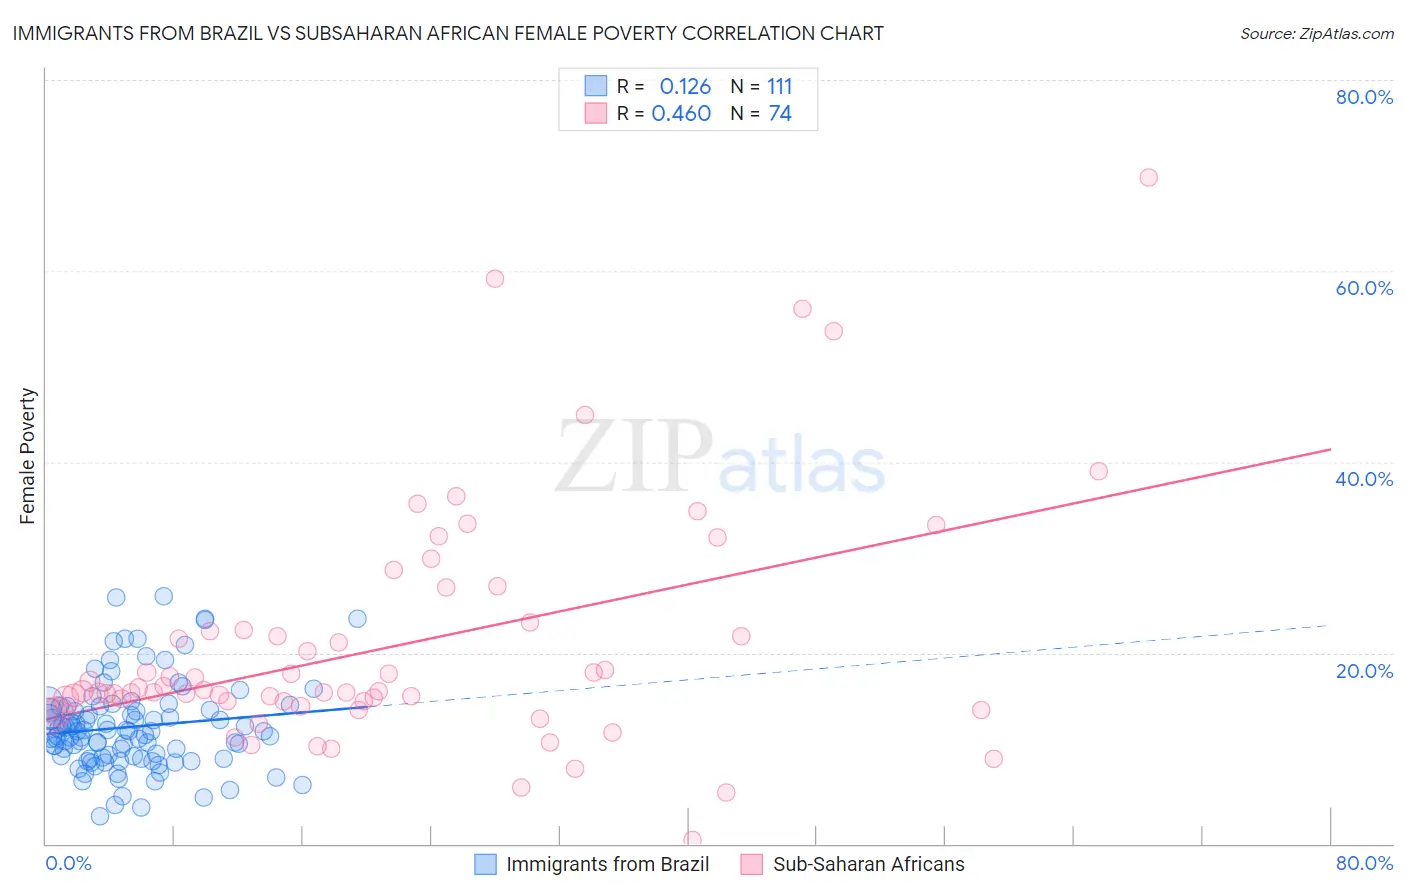 Immigrants from Brazil vs Subsaharan African Female Poverty